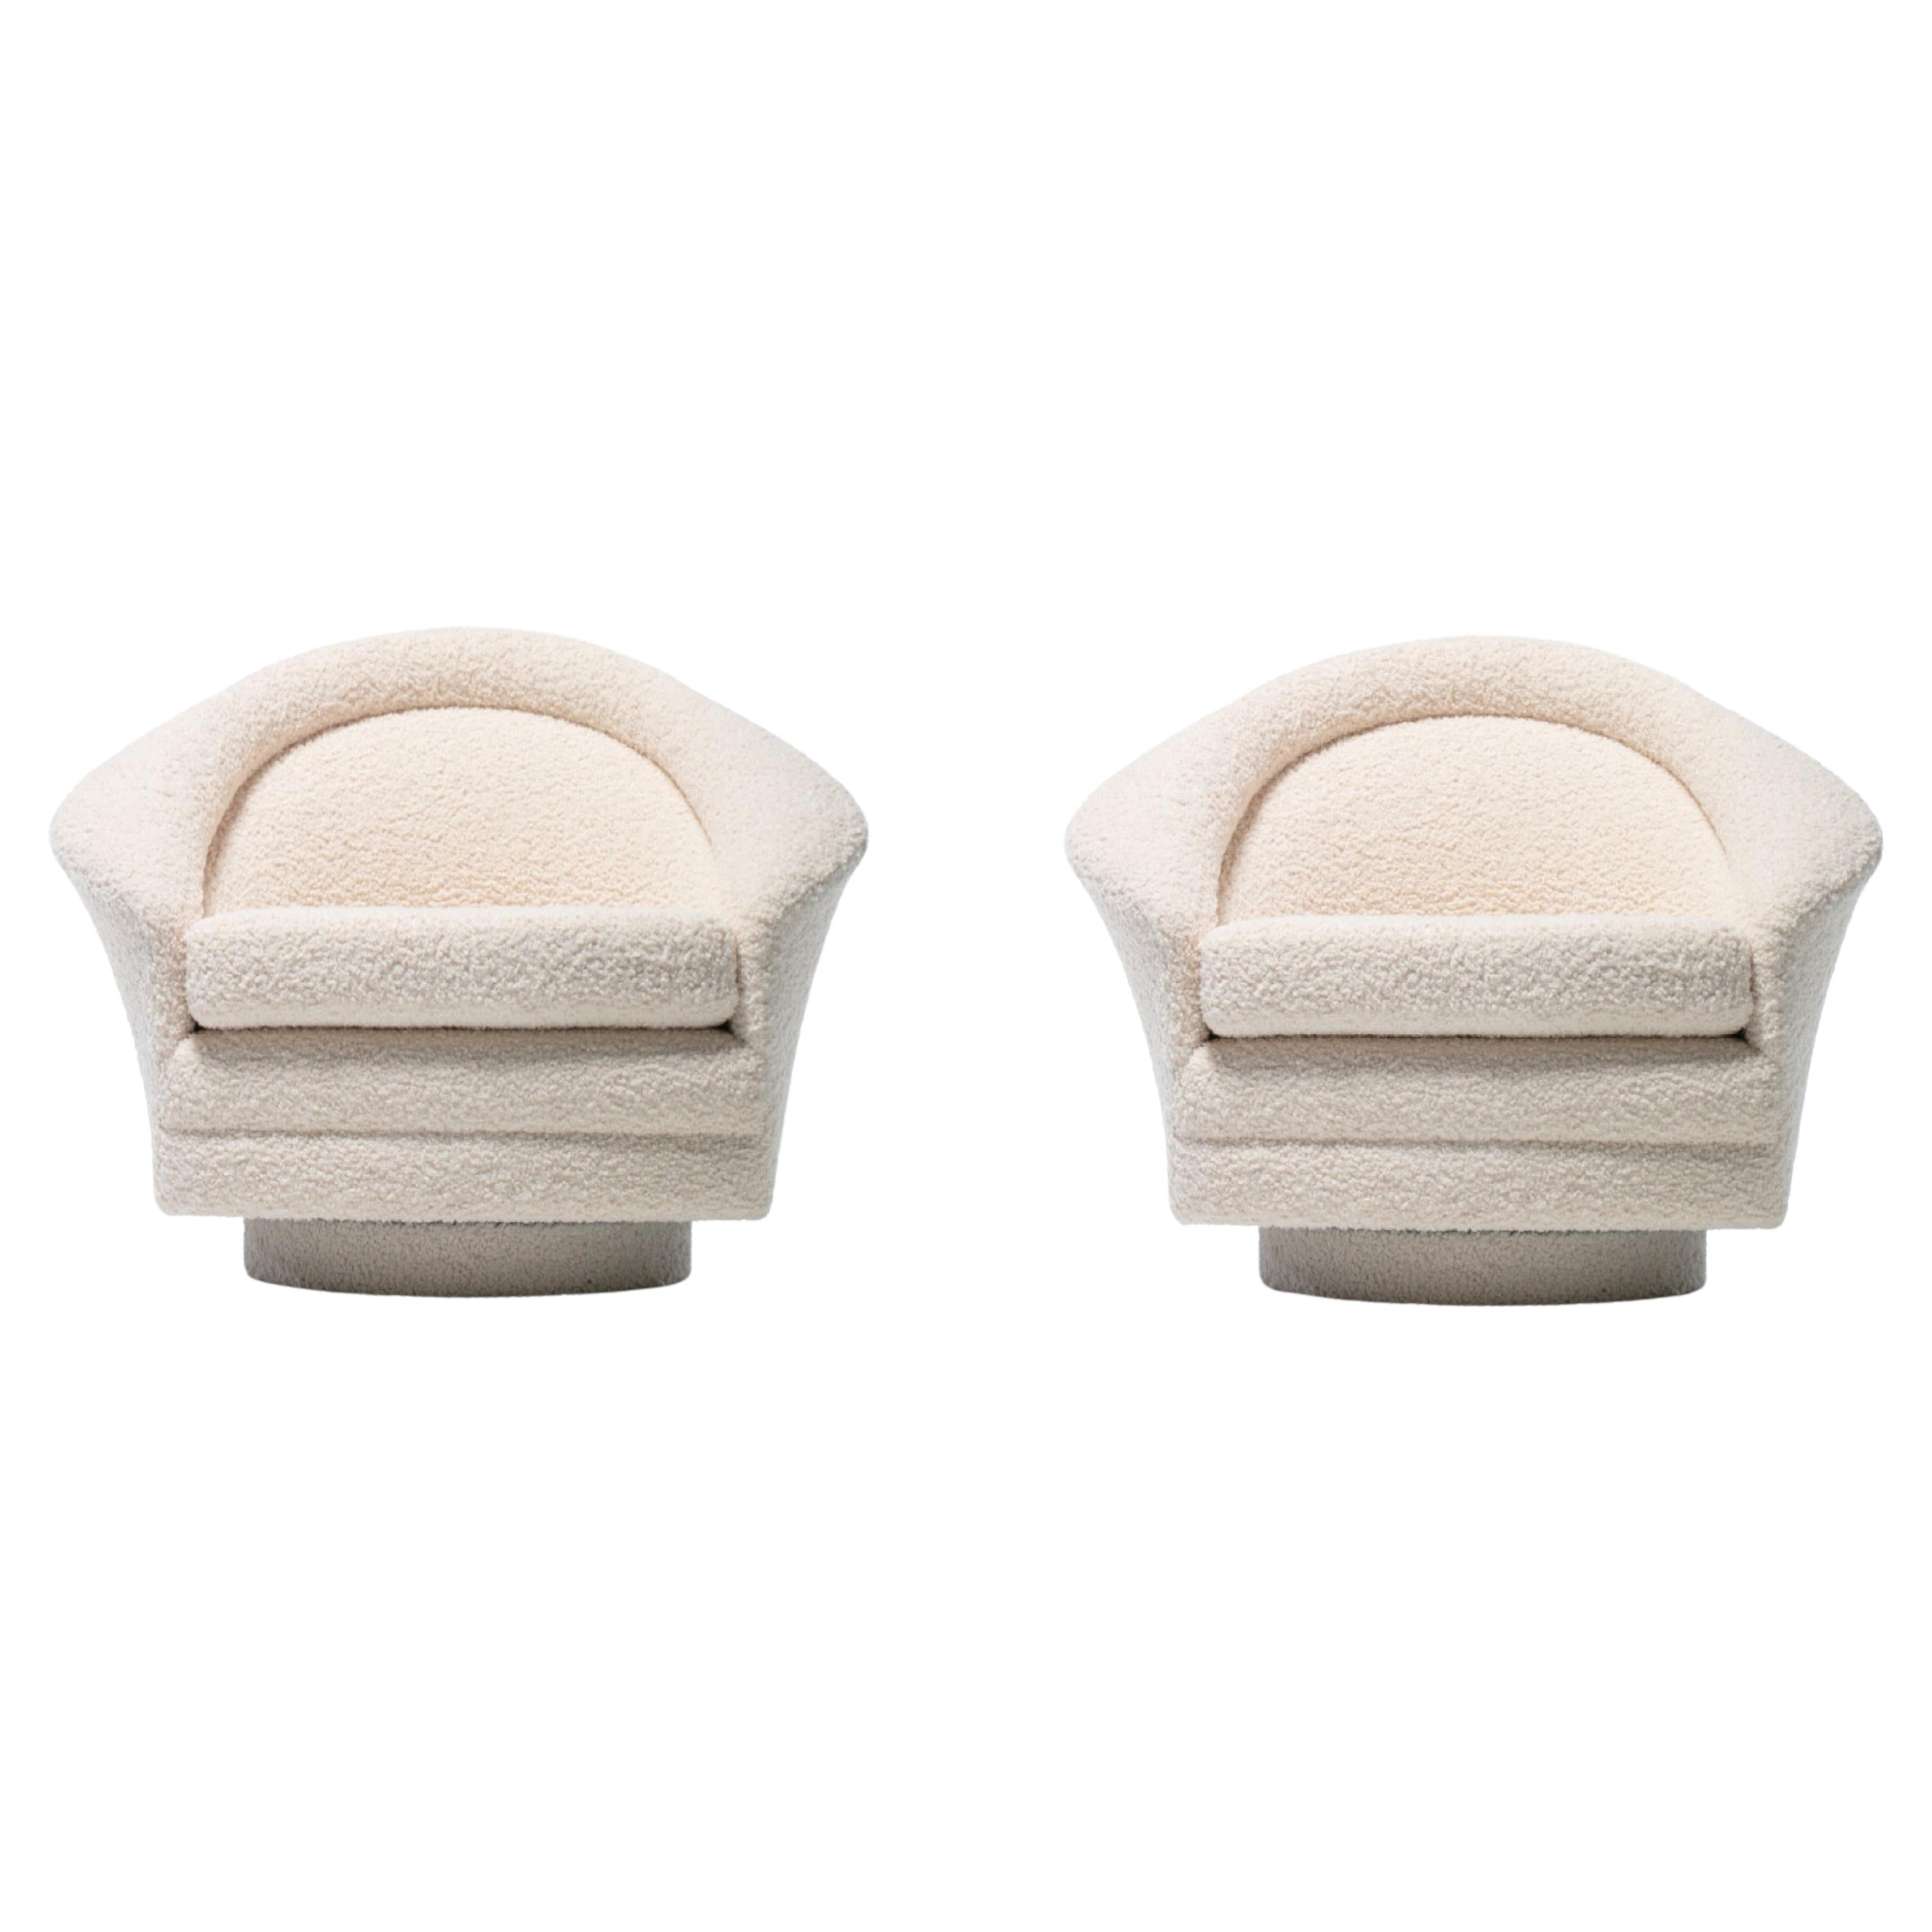 Pair of Adrian Pearsall Swivel Chairs in Ivory Bouclé c. 1970s For Sale 3